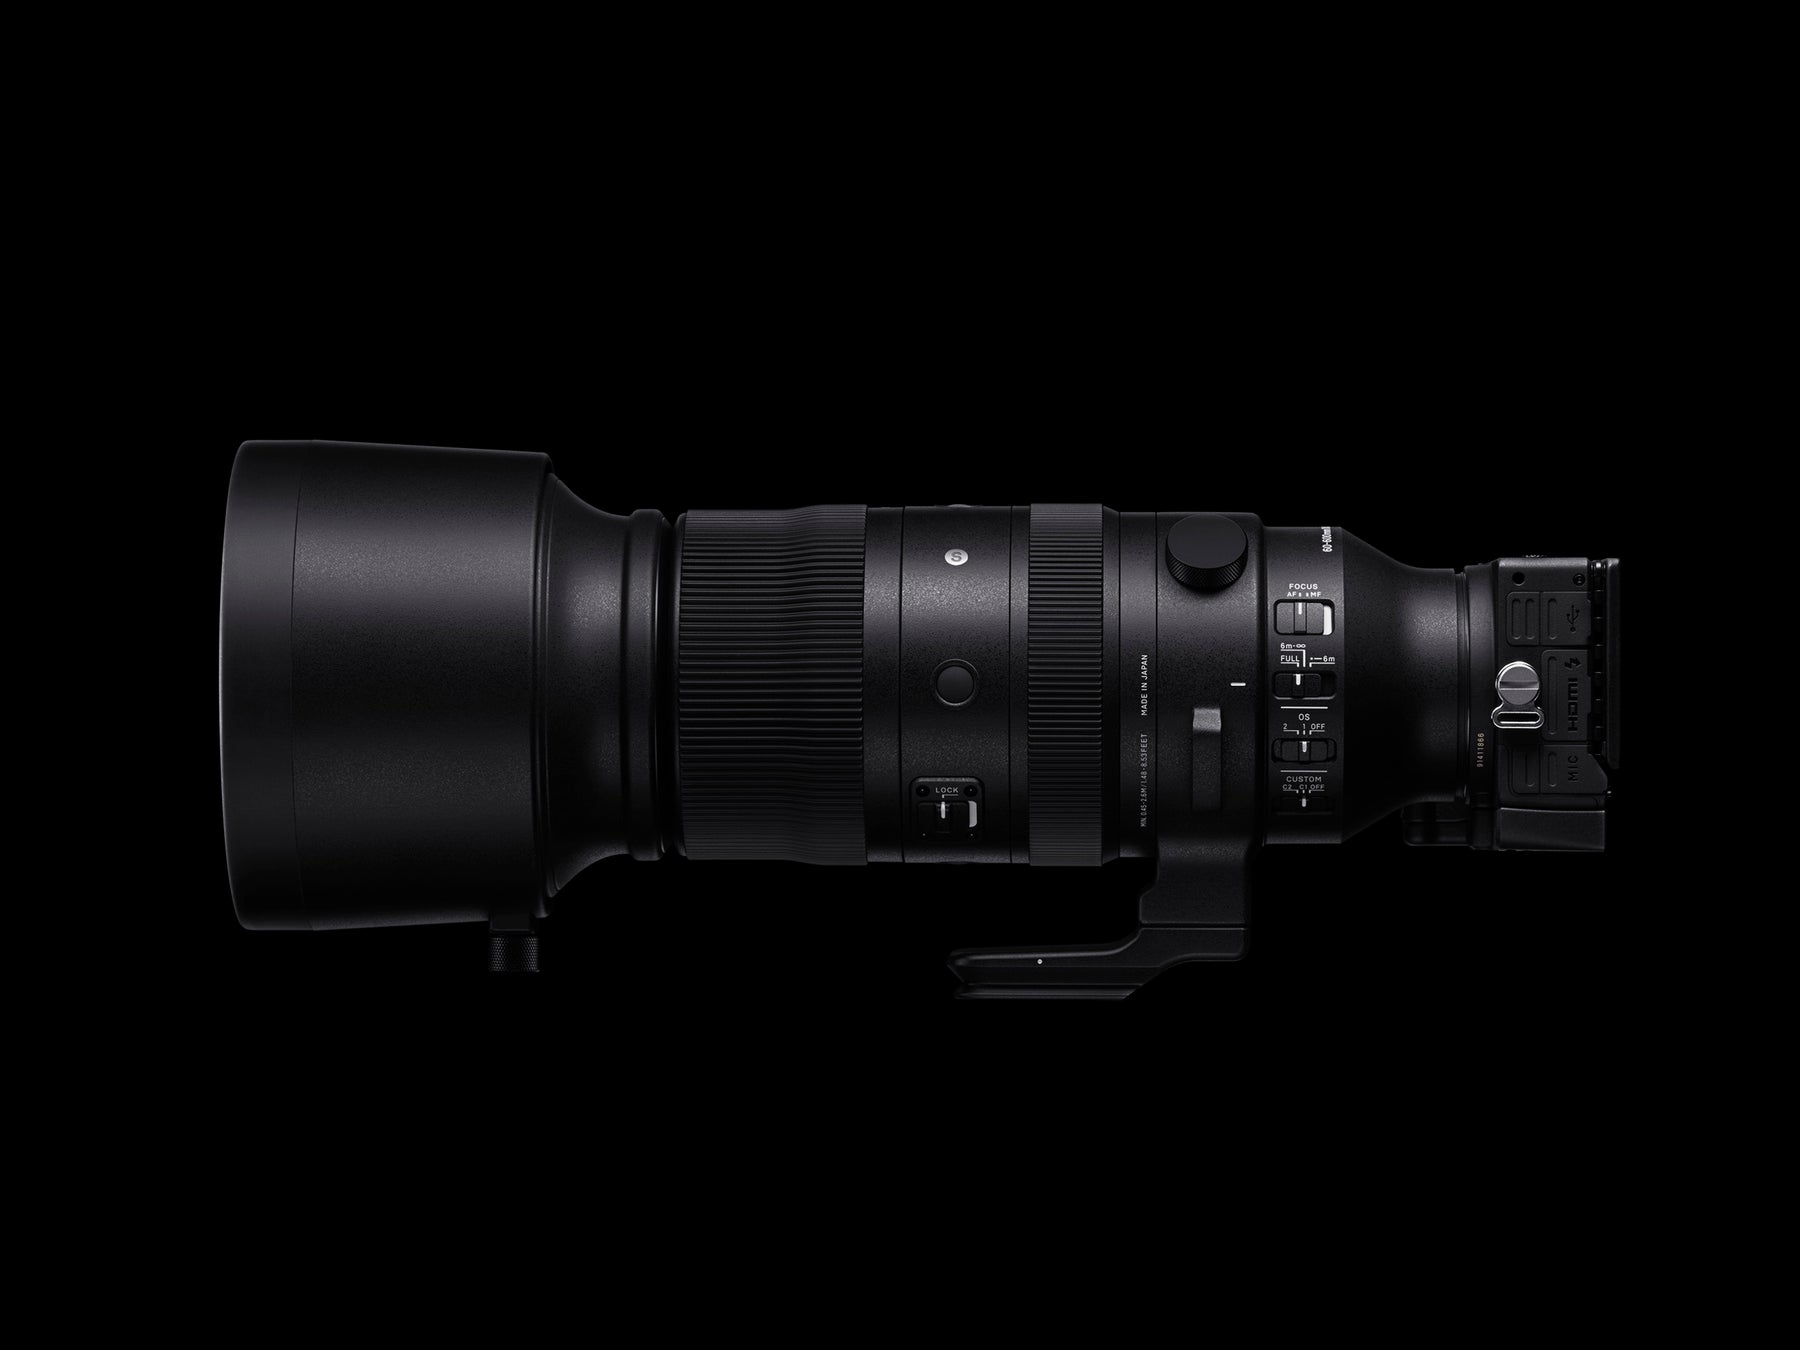 SIGMA 60-600mm F4.5-6.3 DG DN OS | Sports has received EISA Awards 2023-2024.